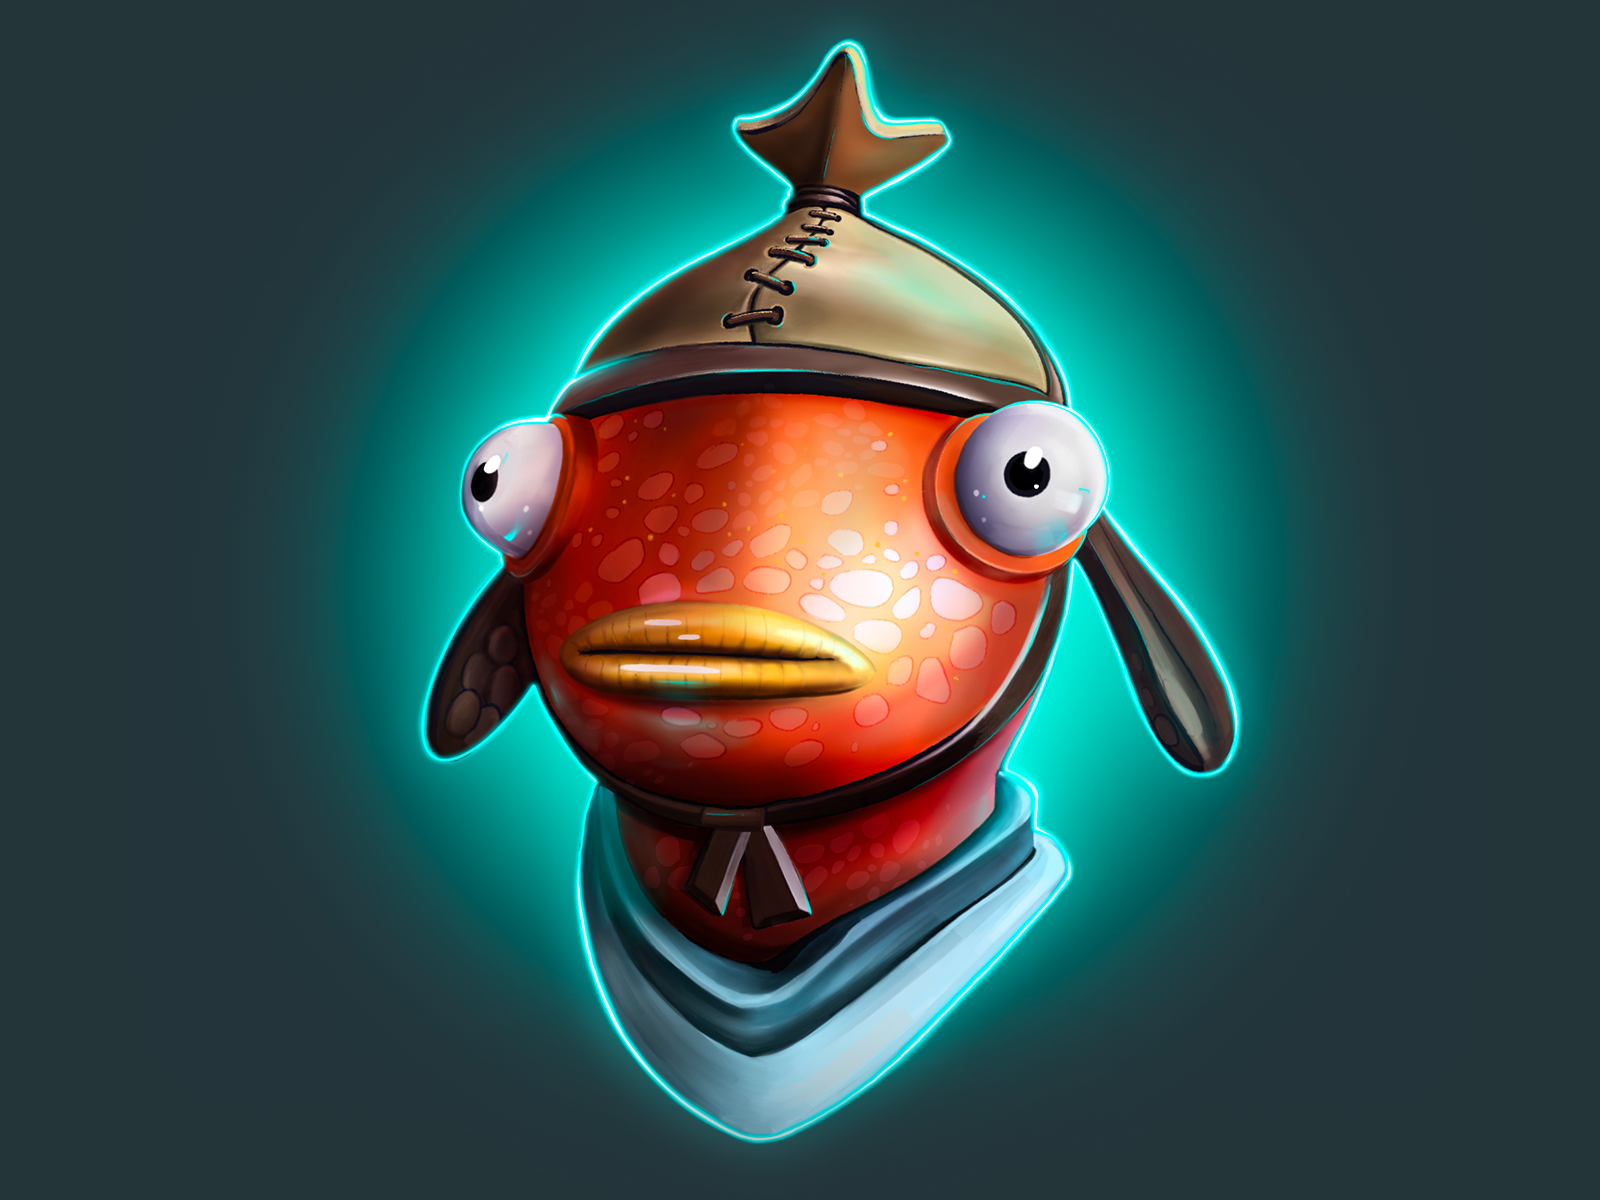 Fortnite Fishstick - 3D Model by geumy